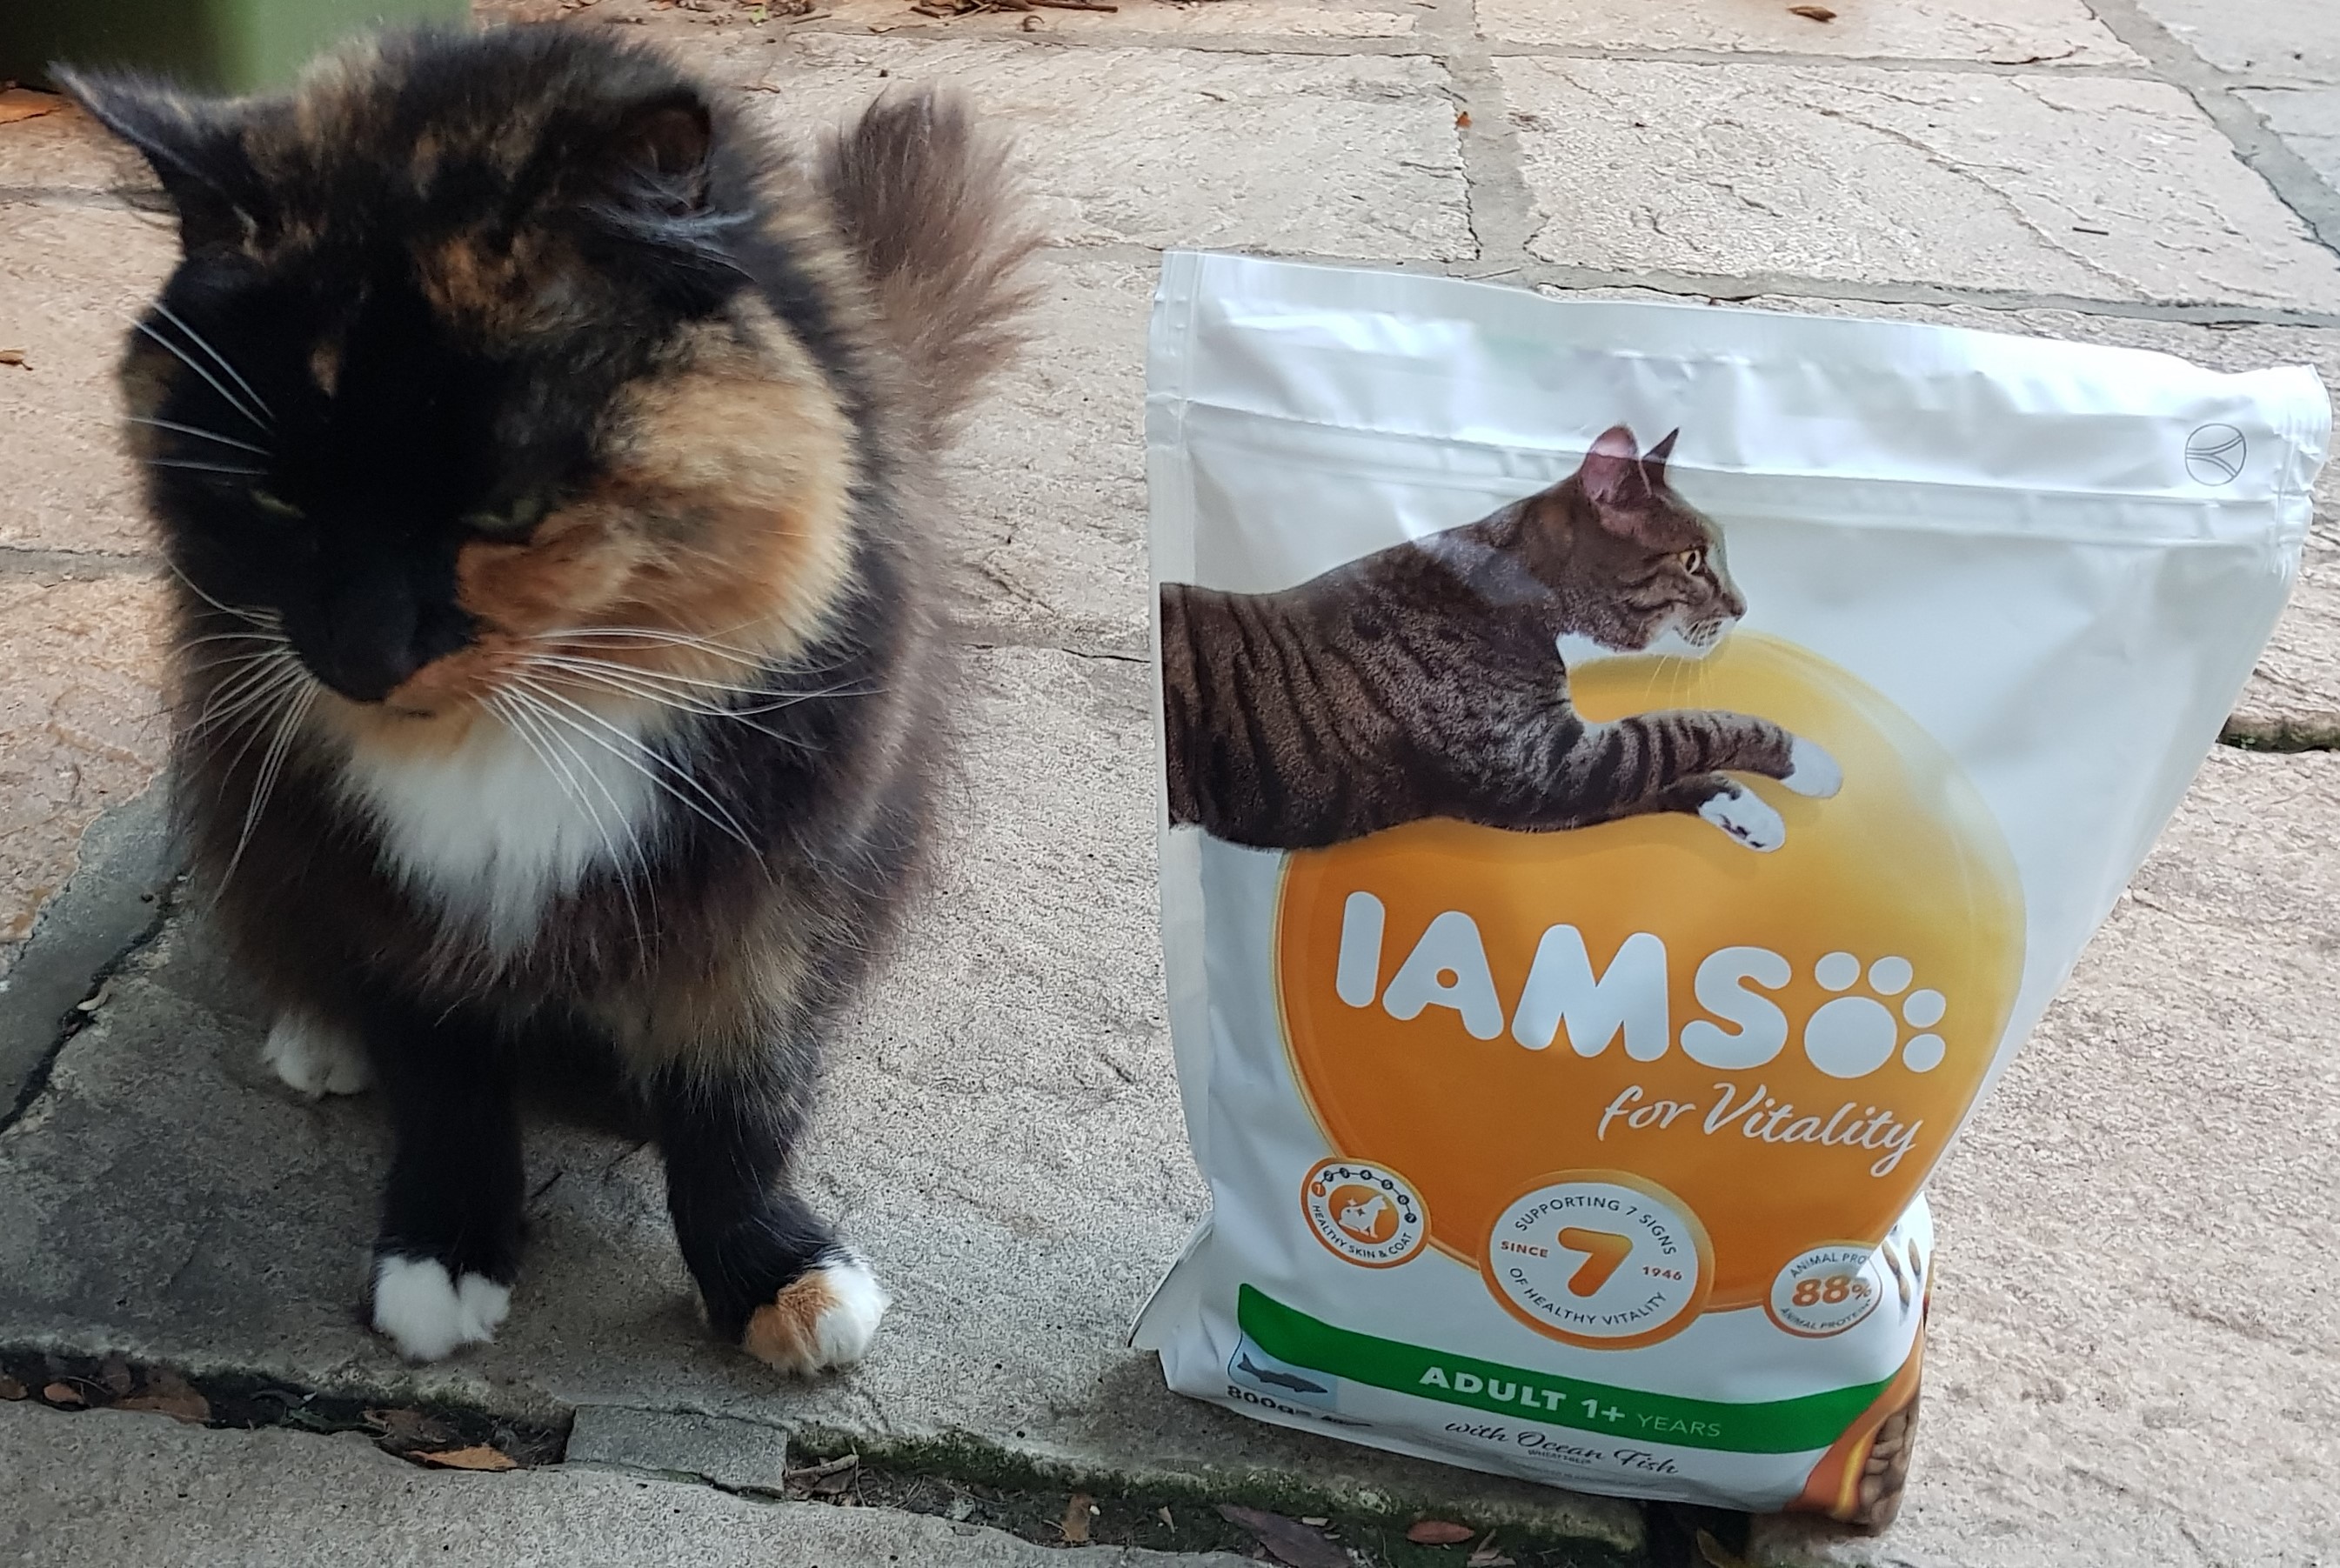 How to get free cat food samples in UK